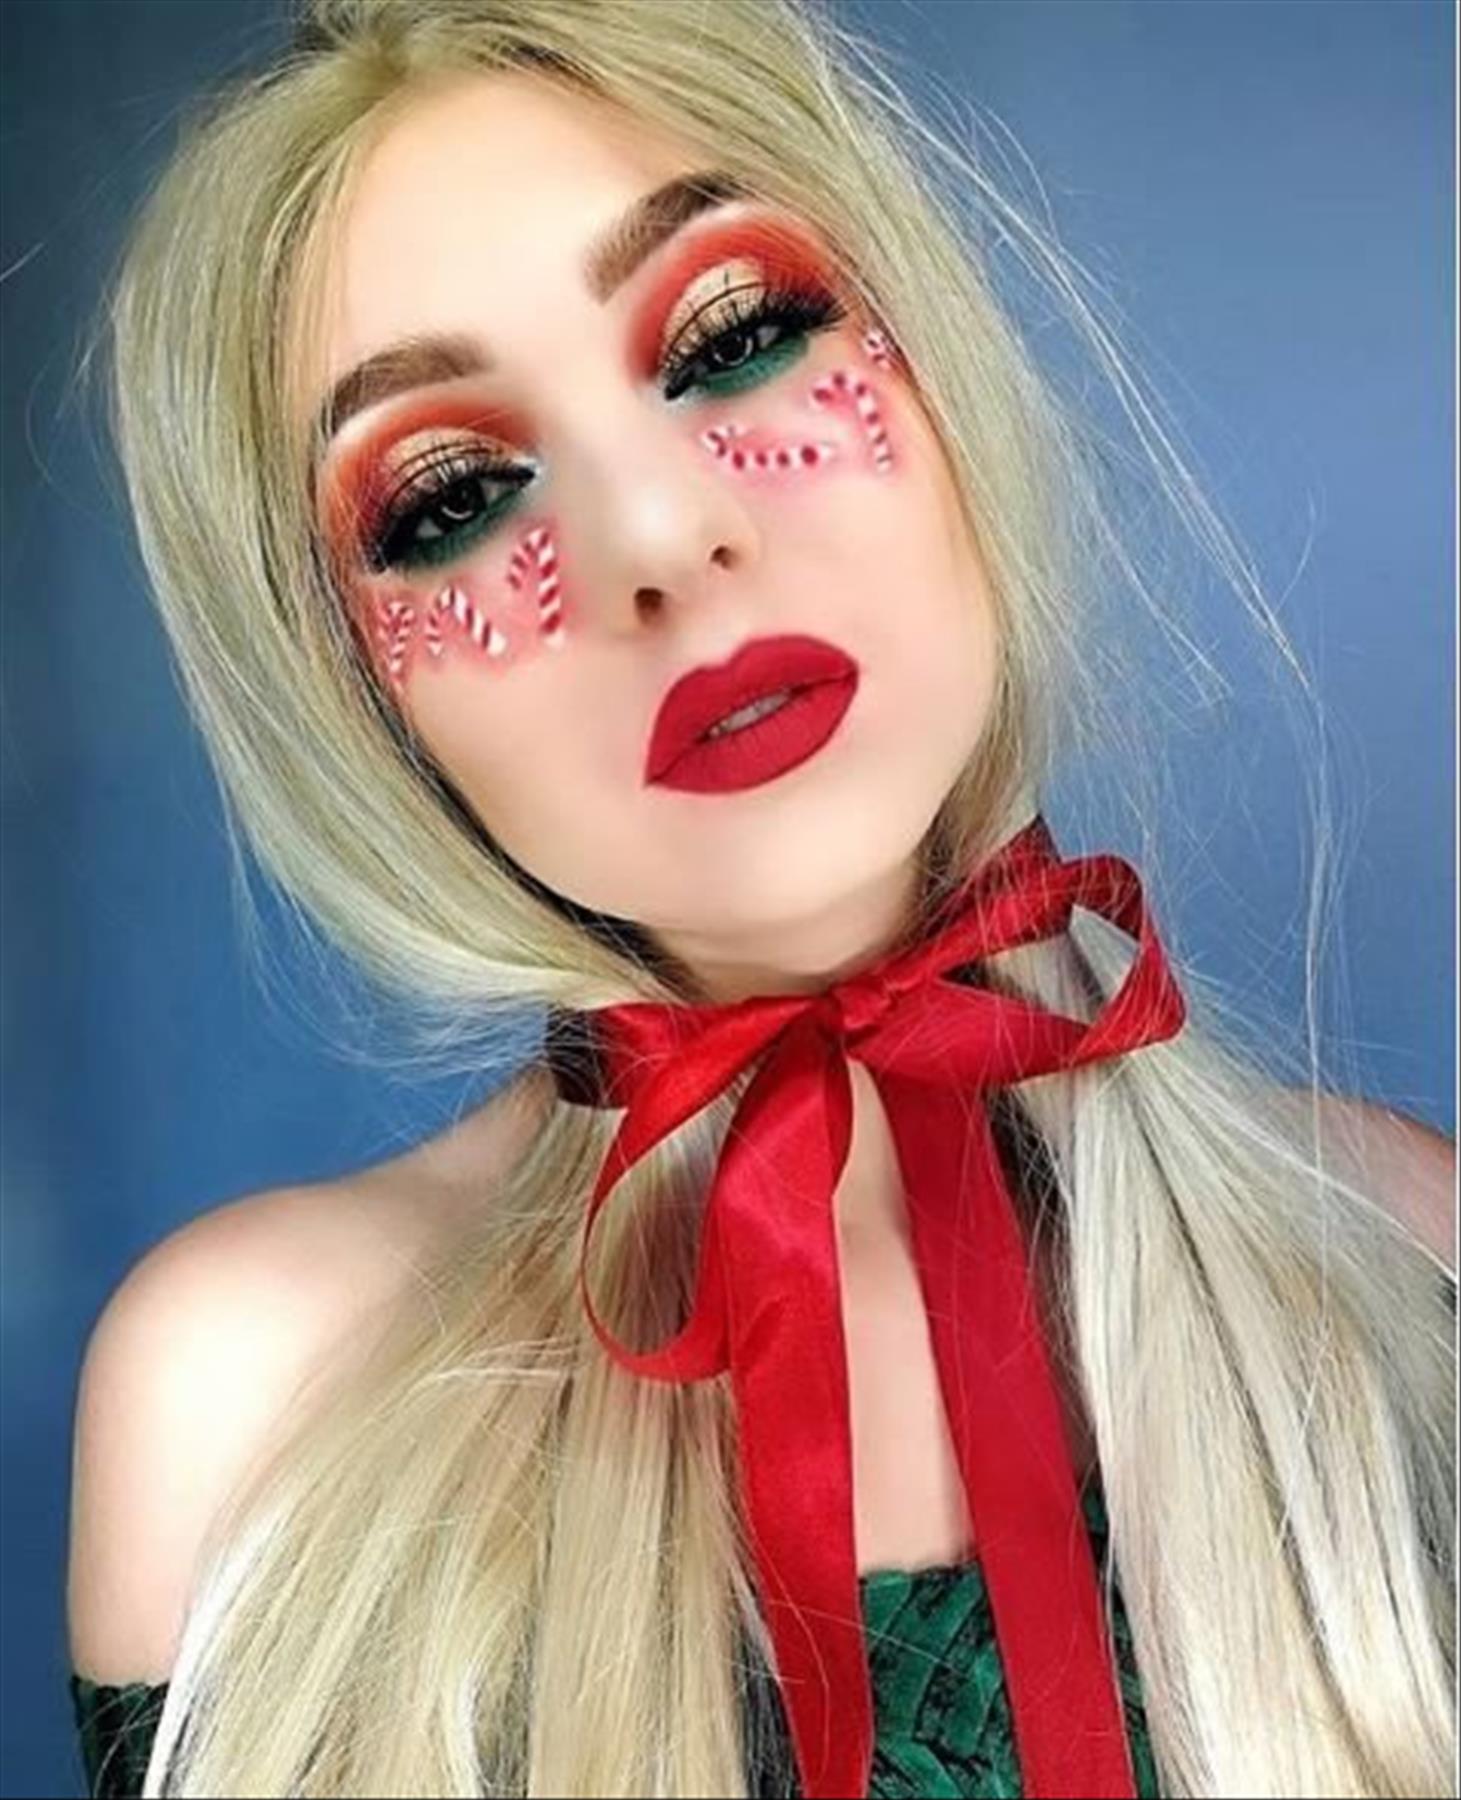 Awesome Christmas Makeup Ideas to Try This Holiday